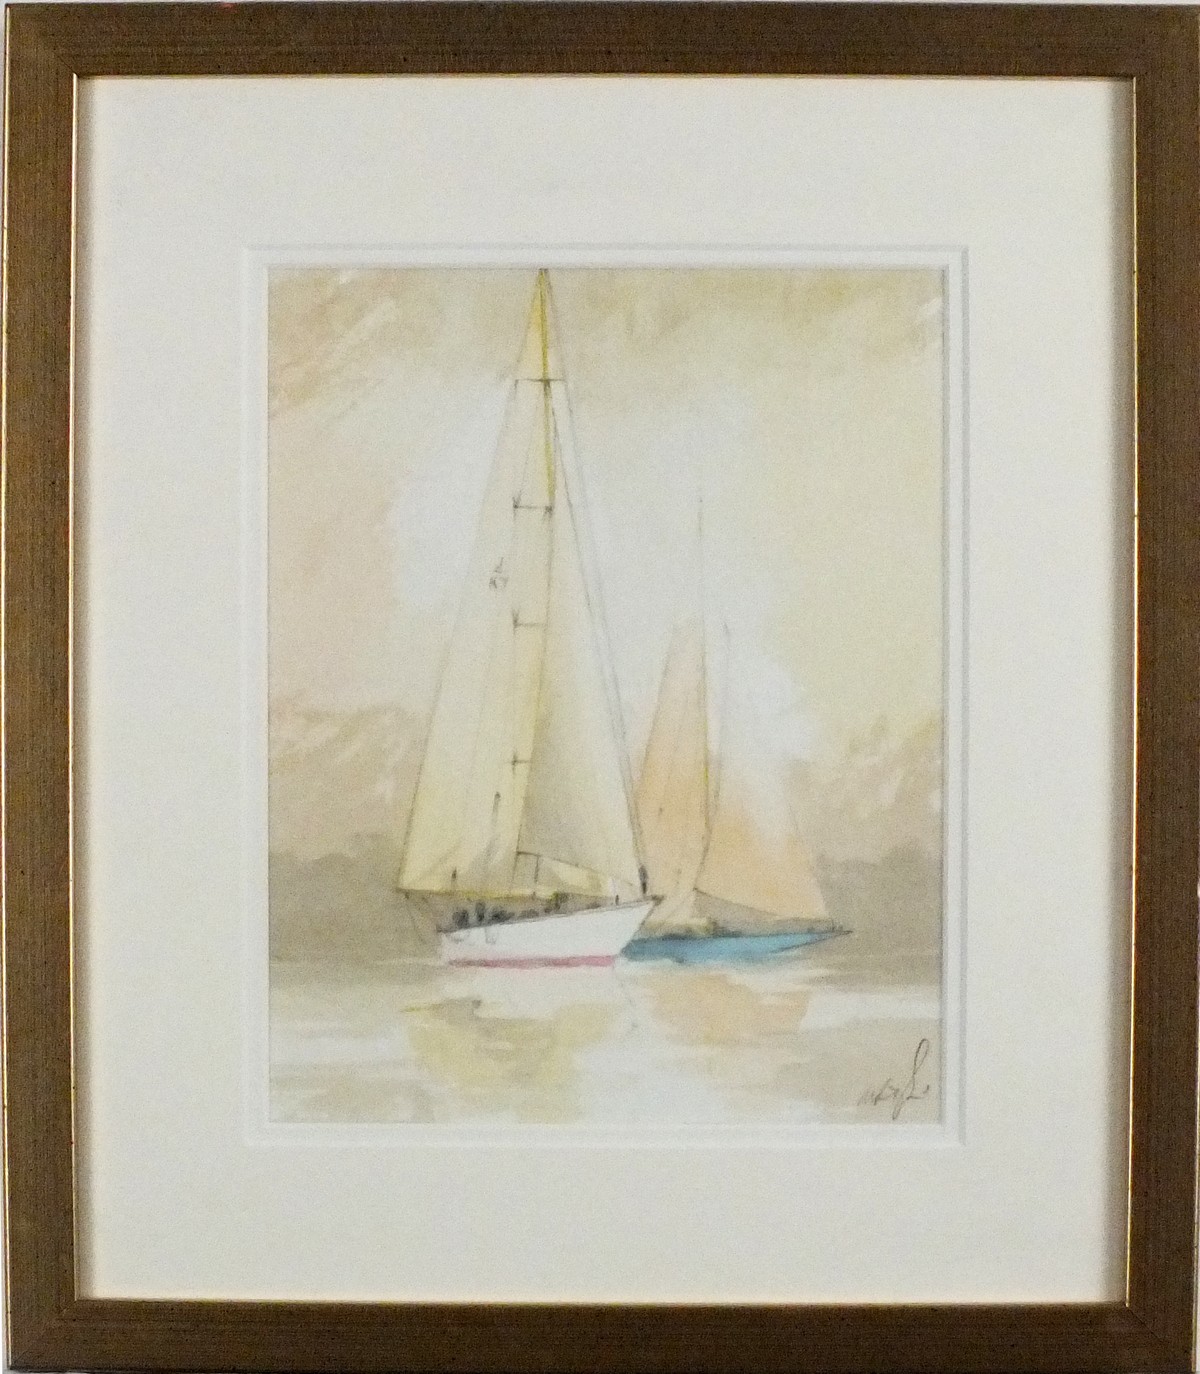 Frank TYHURST (20th/21st Century British School)  'Js in the Mist' (J Class Yachts) , Watercolour, - Image 2 of 3